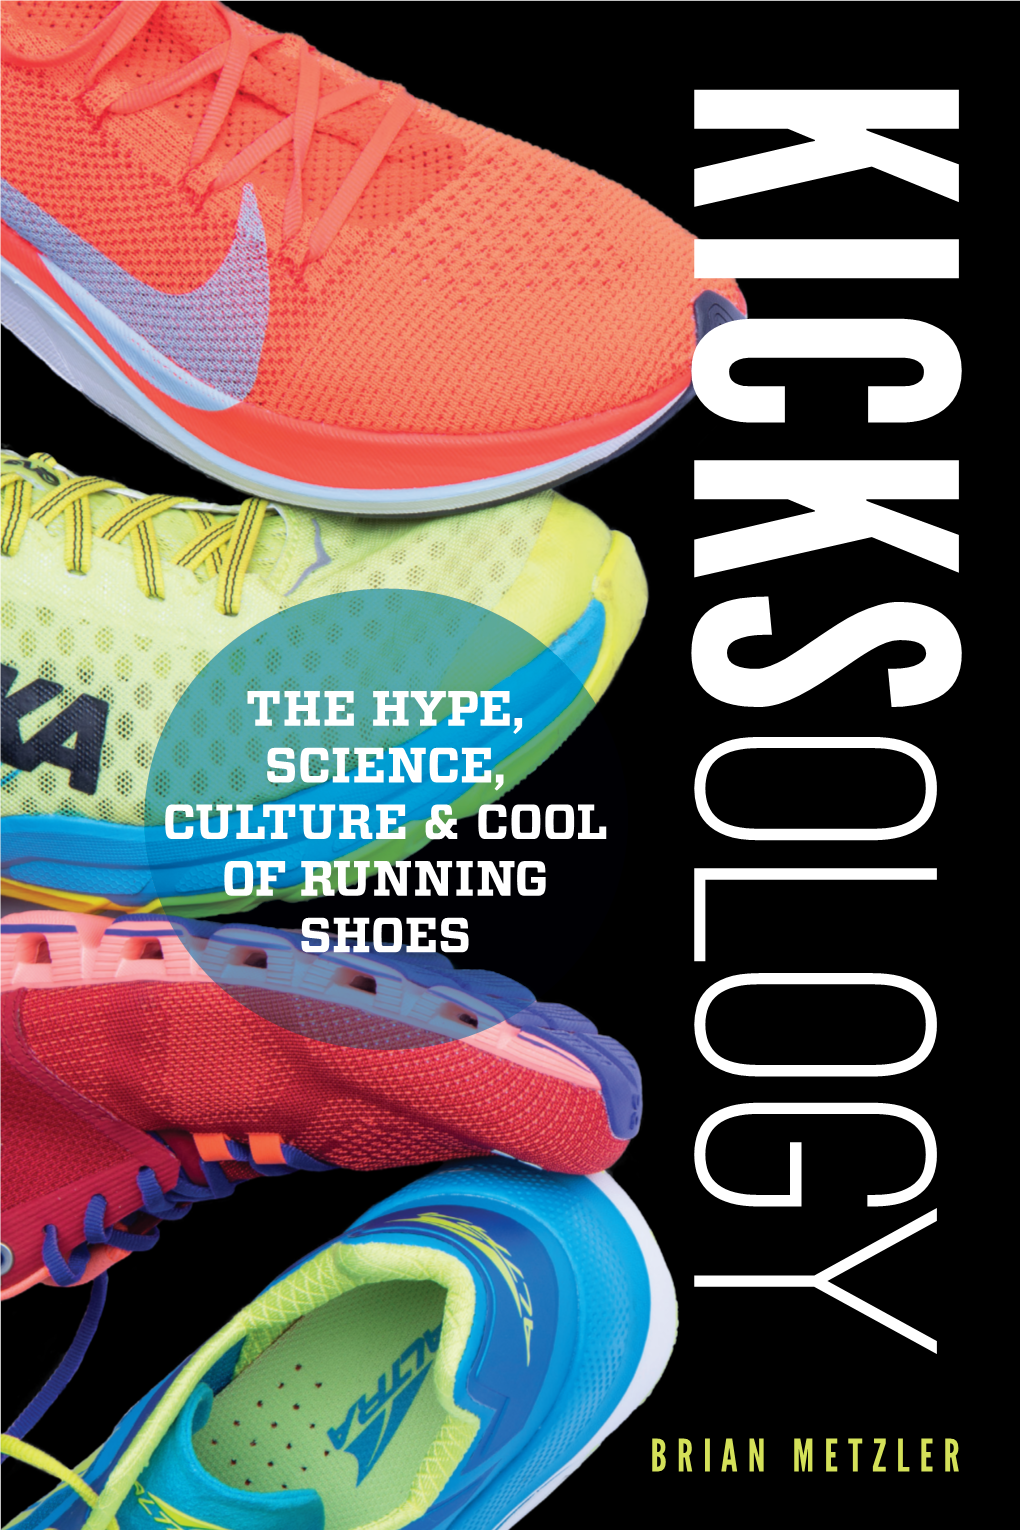 The Hype, Science, Culture & Cool of Running Shoes